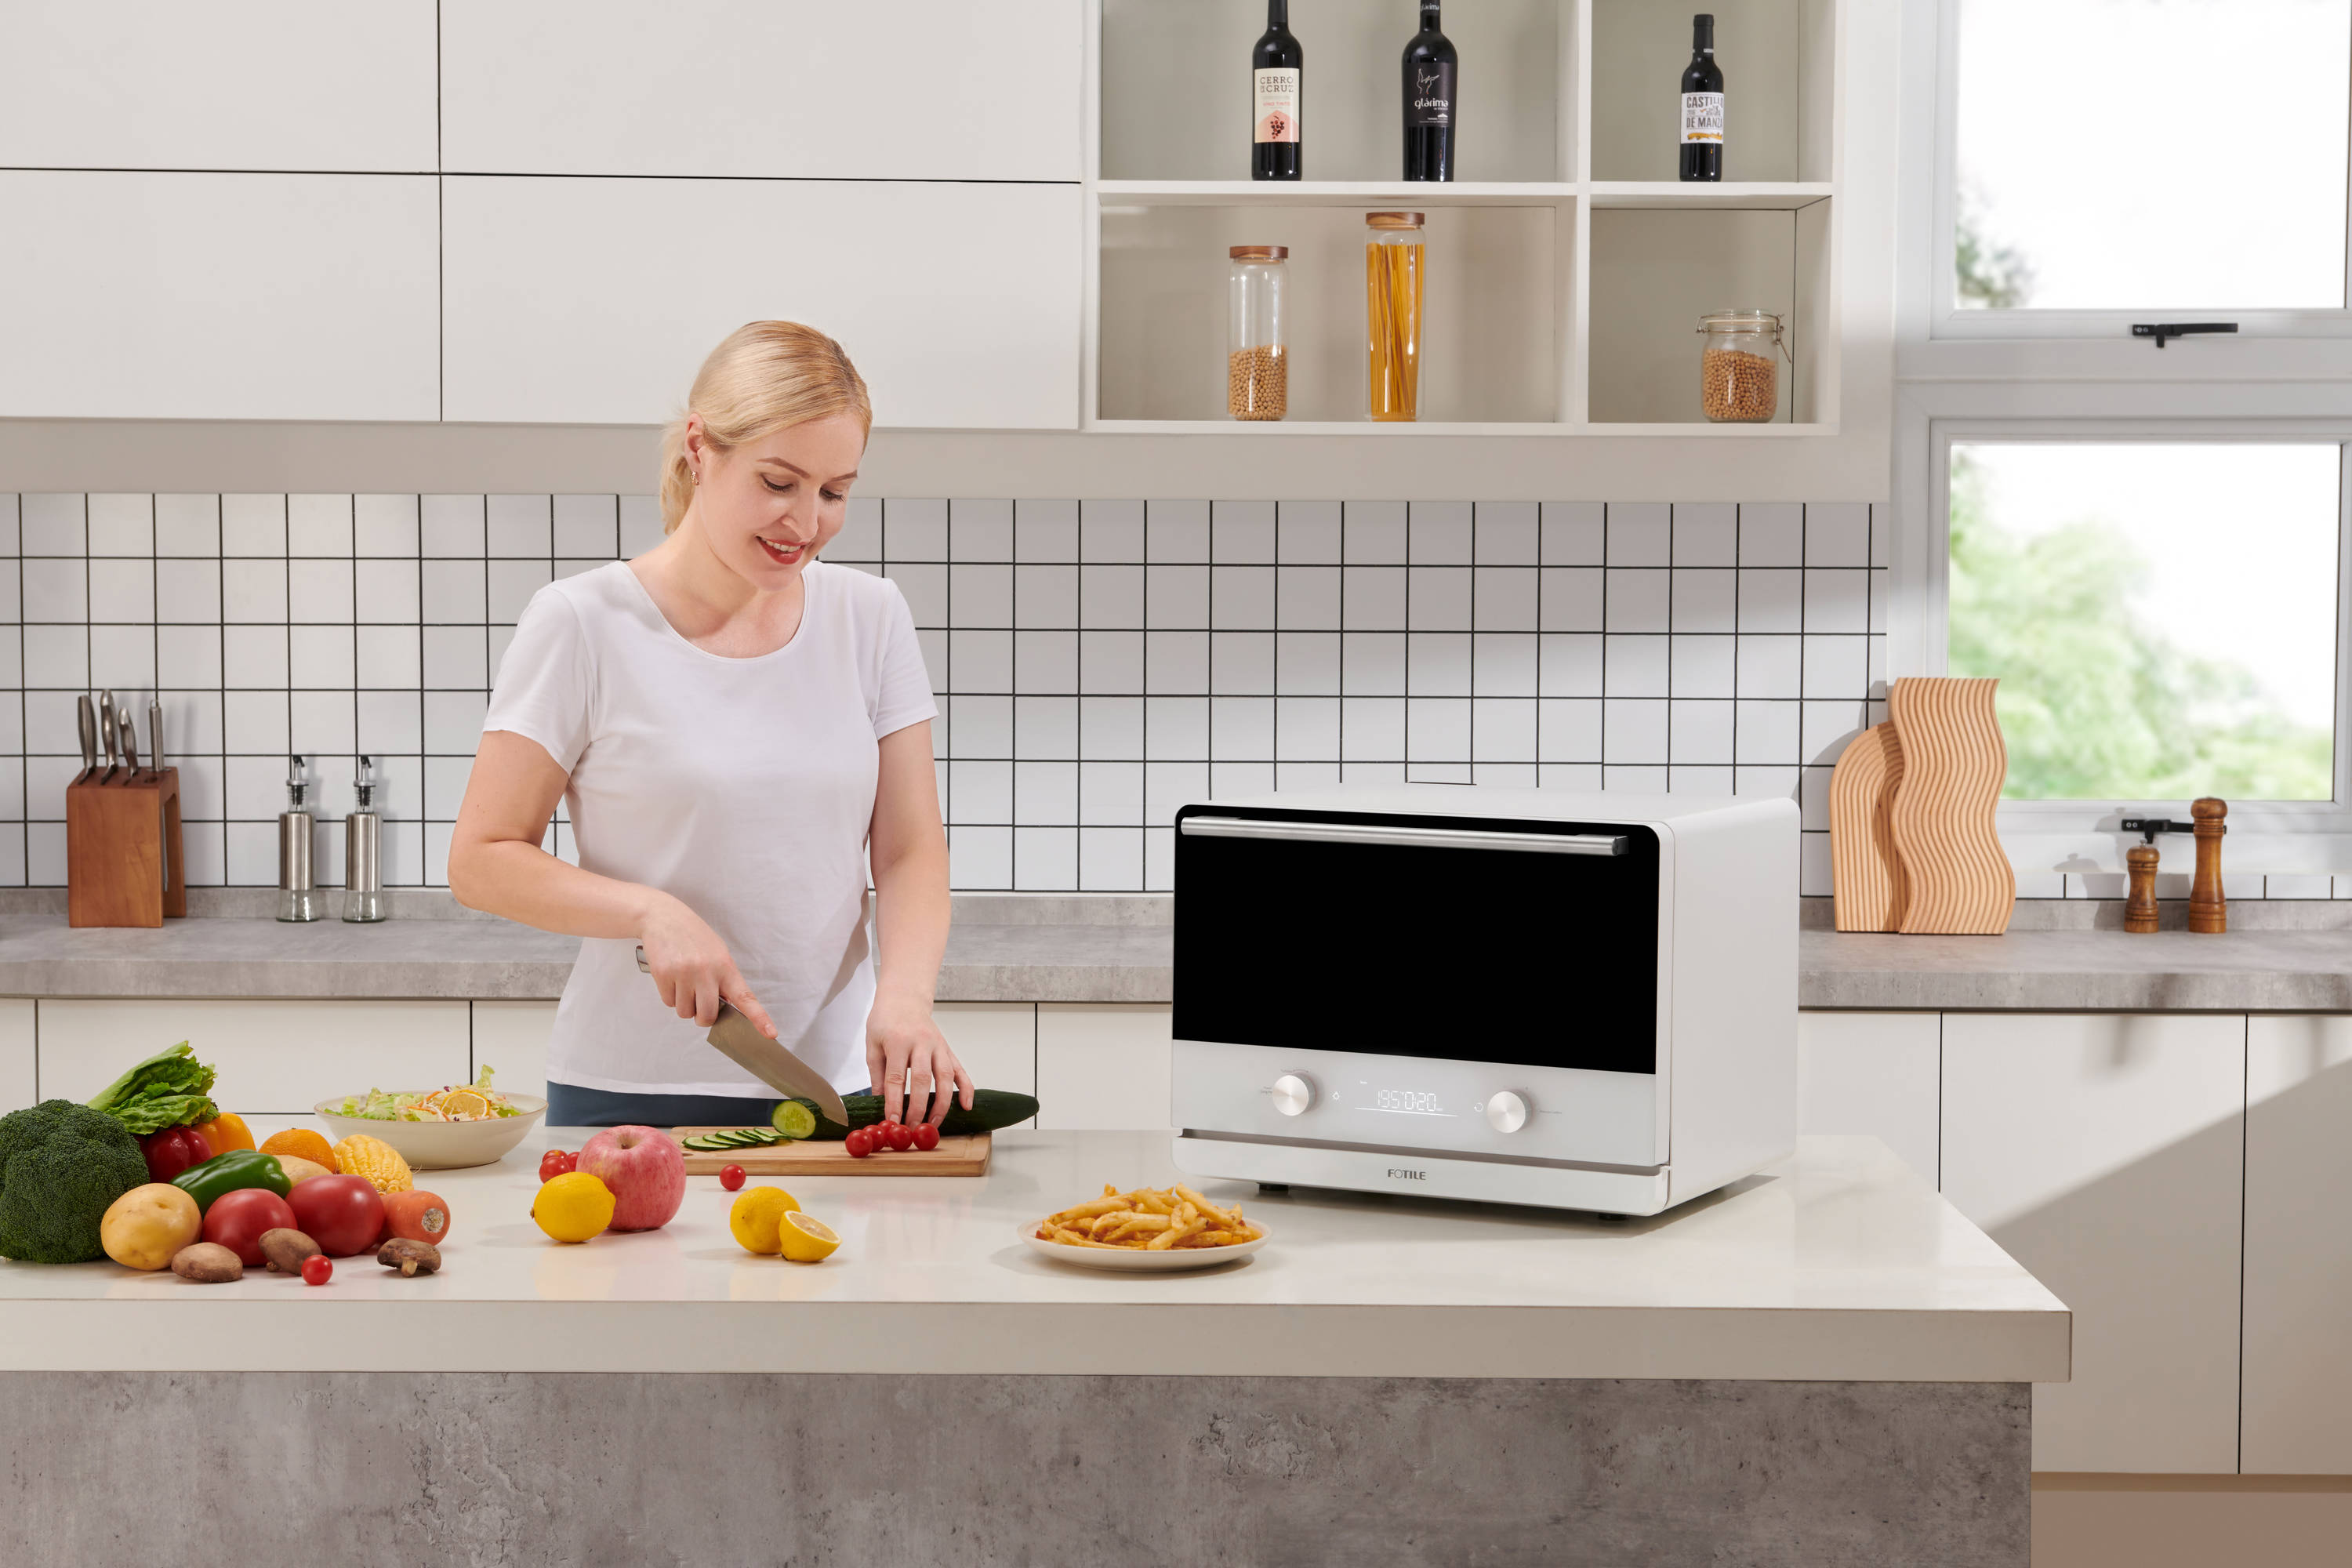 FOTILE Introduces A Multifunctional 4-in-1 Countertop Oven